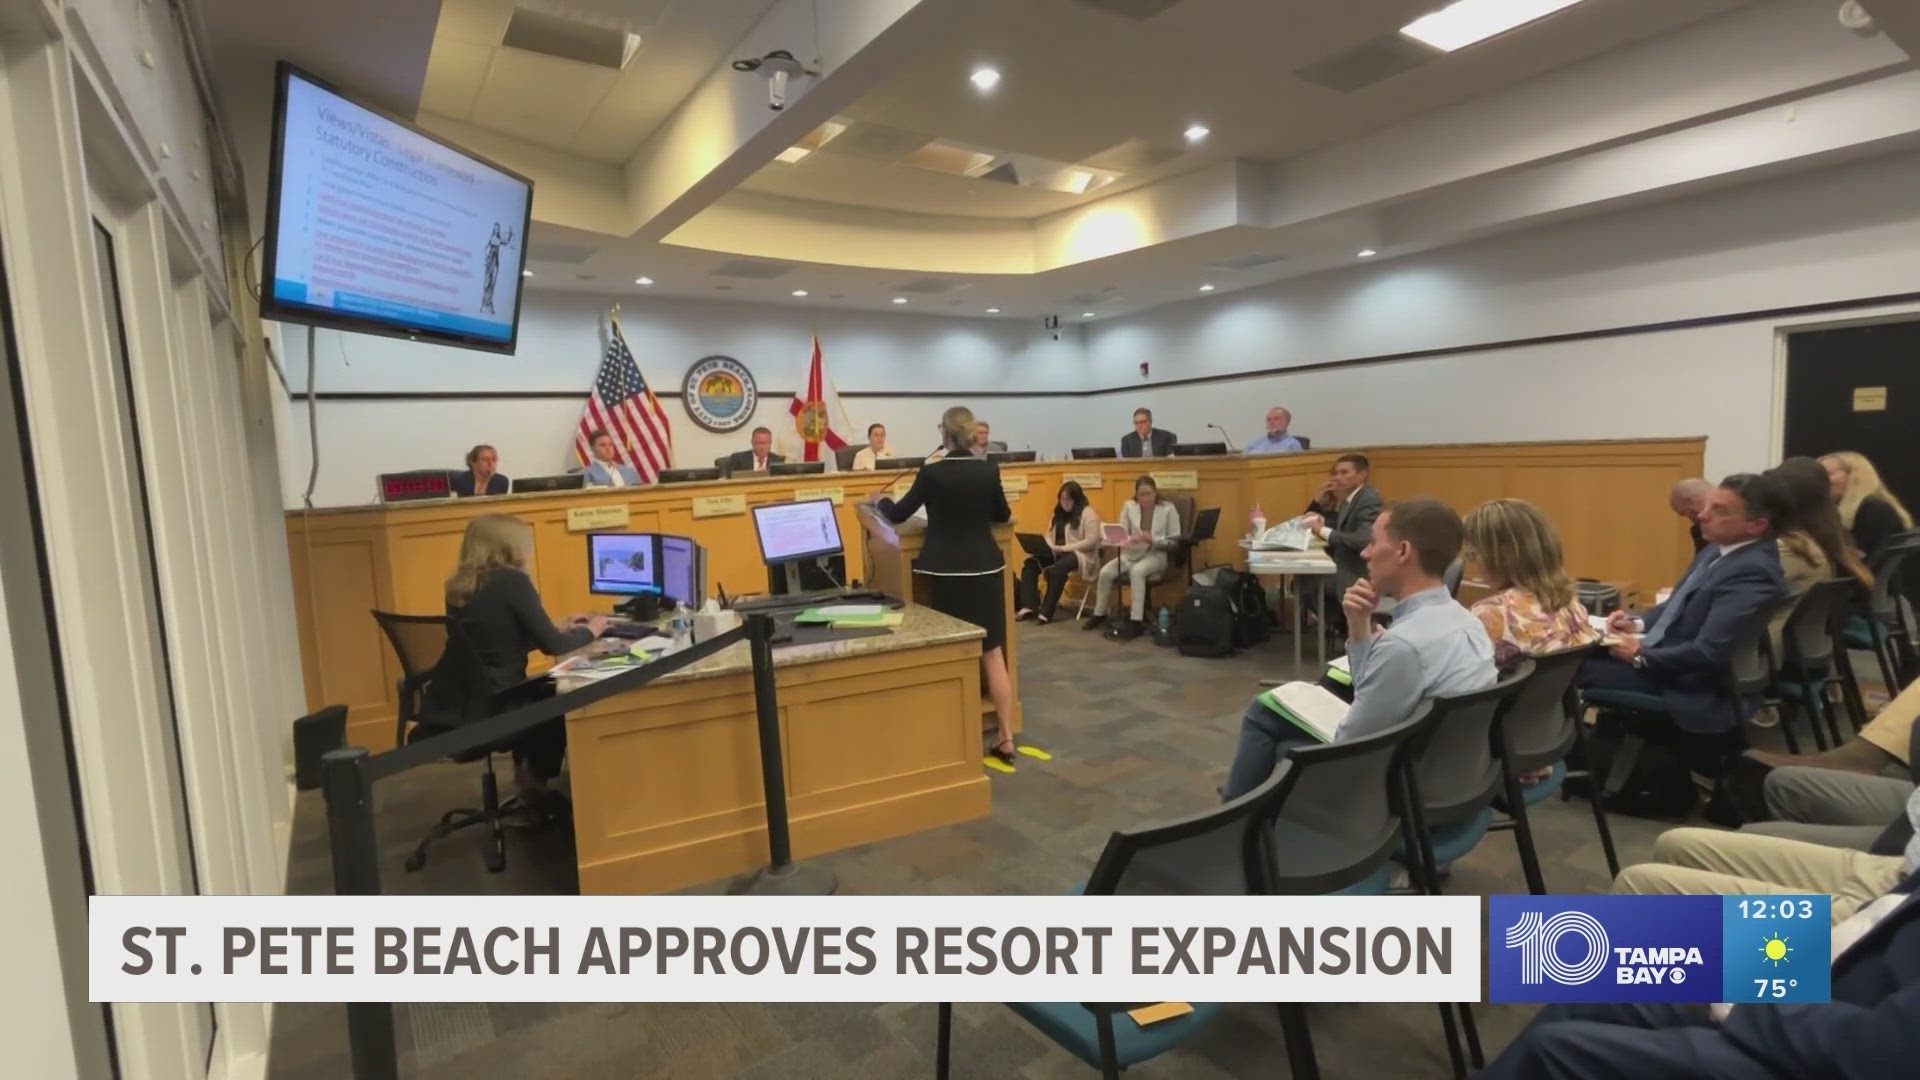 In a 3-2 vote, commissioners approved updates to the Sirata beach resort along with a 10-story JW Marriot hotel and an 8-story Hampton Inn.